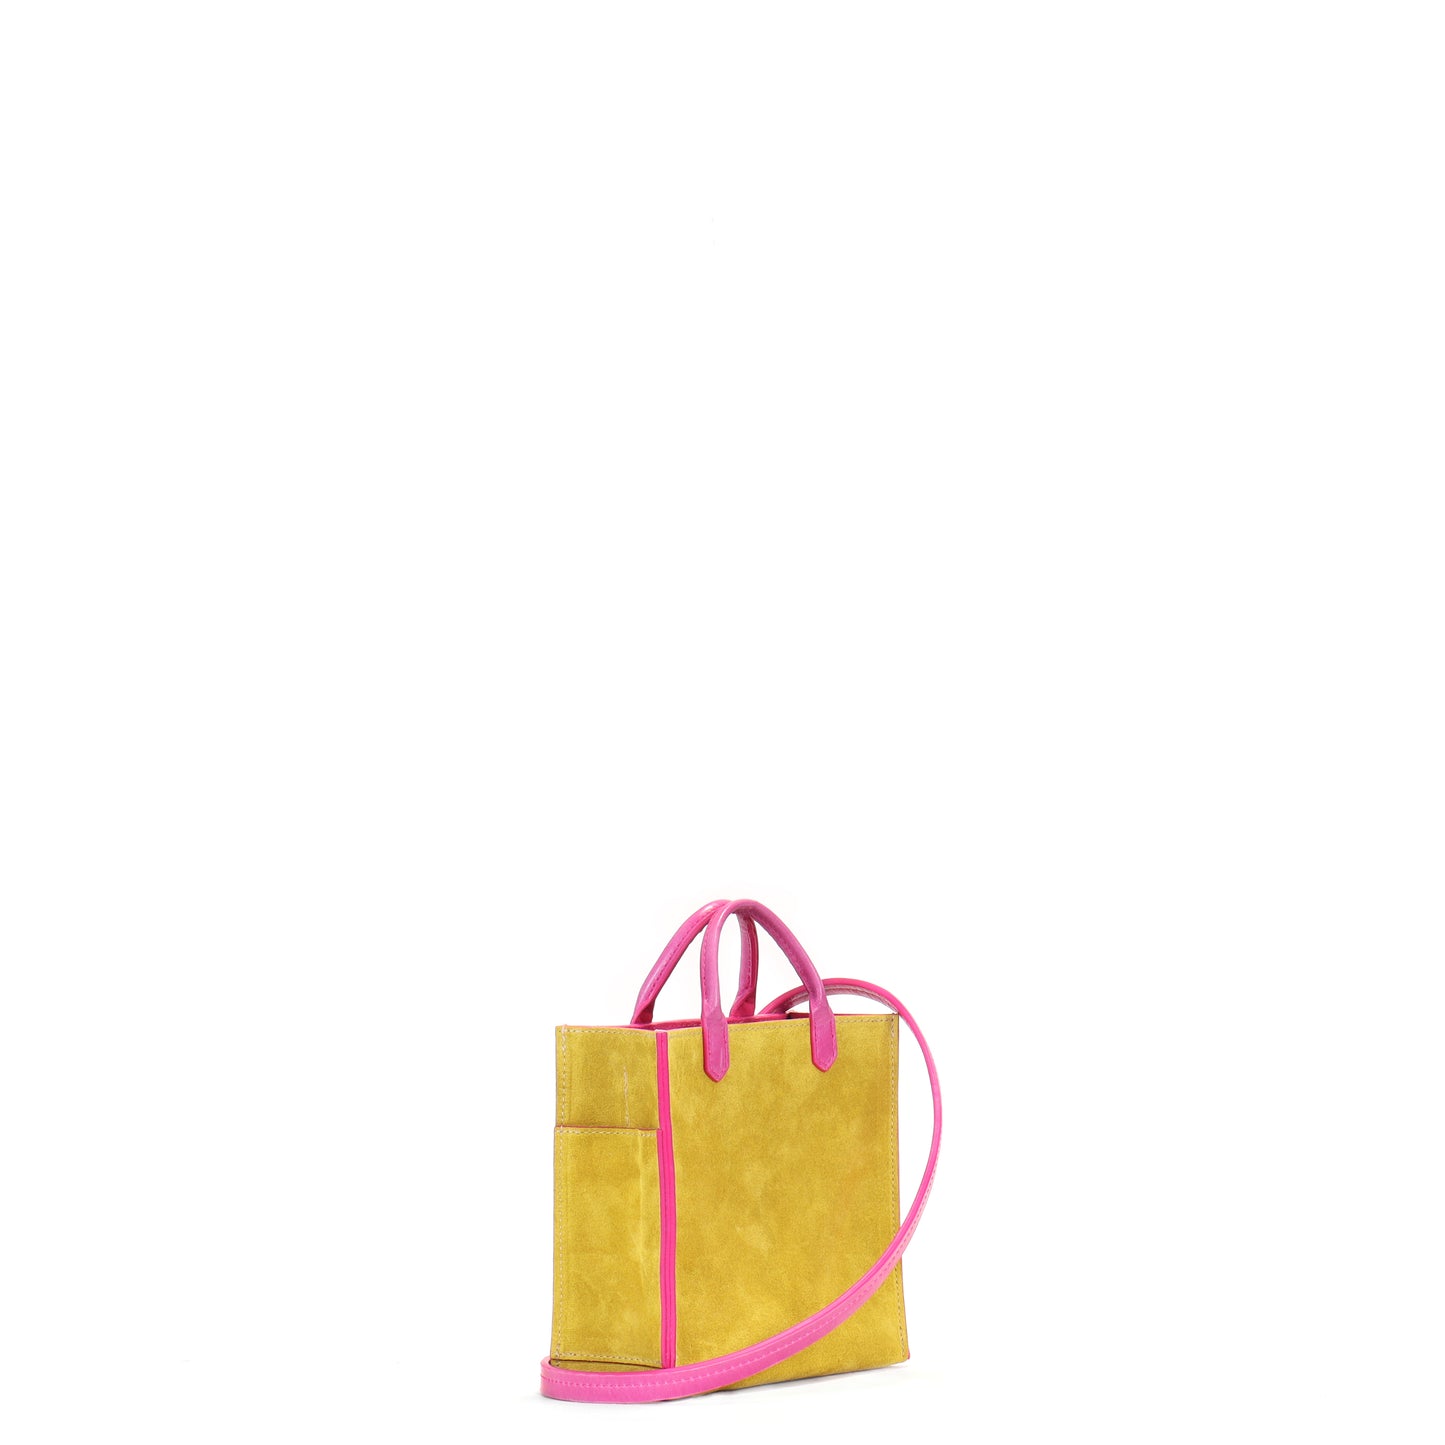 MICRO HARBOR TOTE CITRON SUEDE WITH PINK